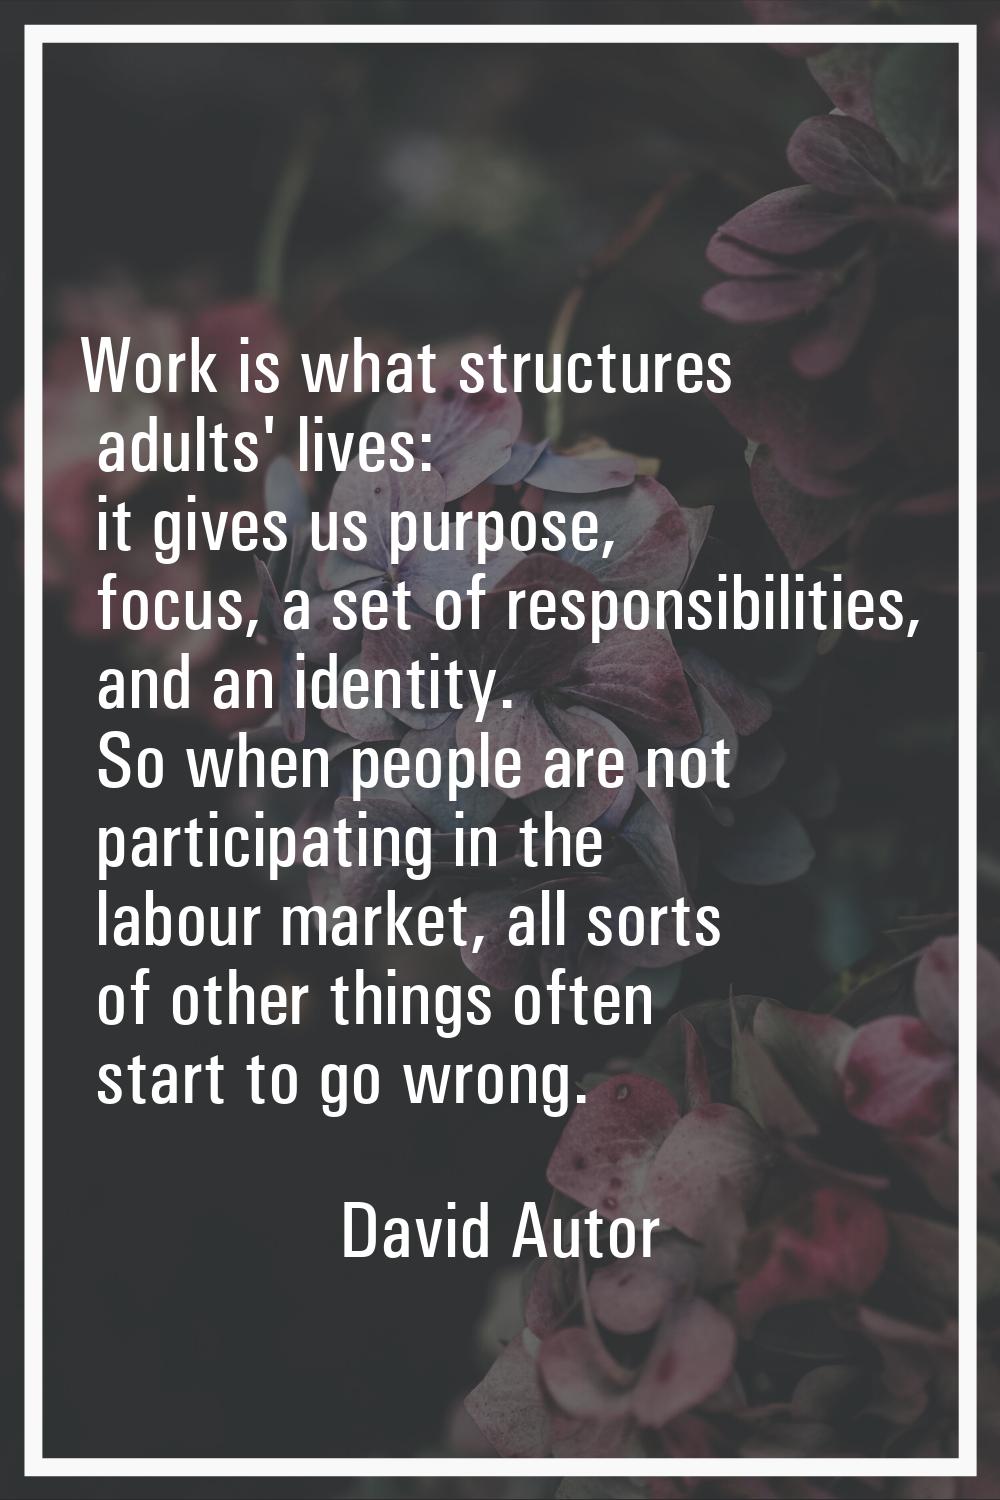 Work is what structures adults' lives: it gives us purpose, focus, a set of responsibilities, and a